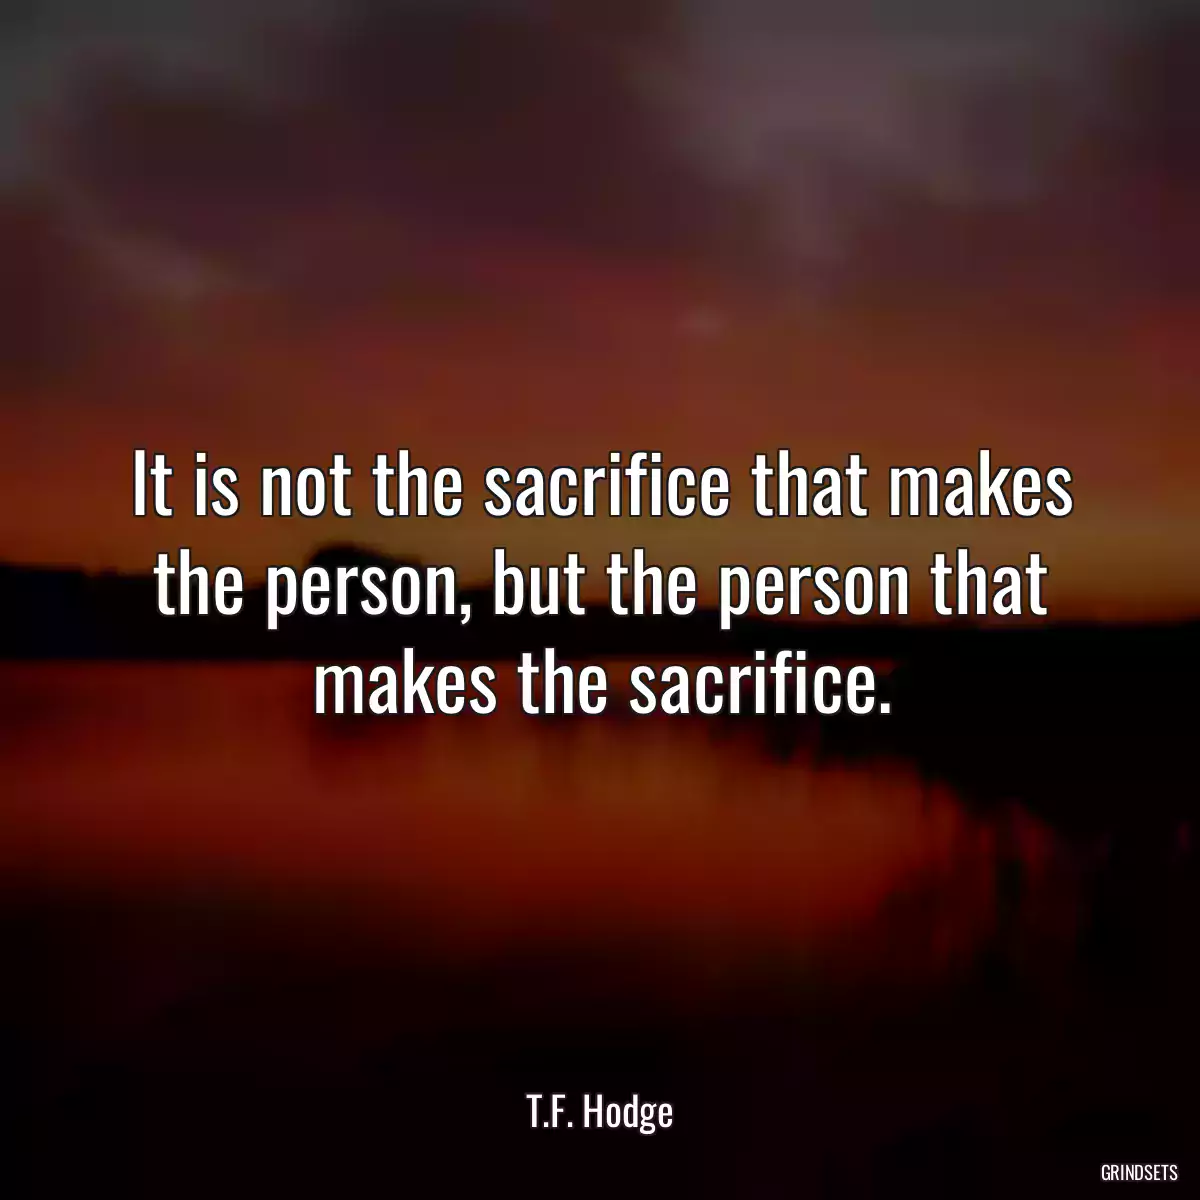 It is not the sacrifice that makes the person, but the person that makes the sacrifice.